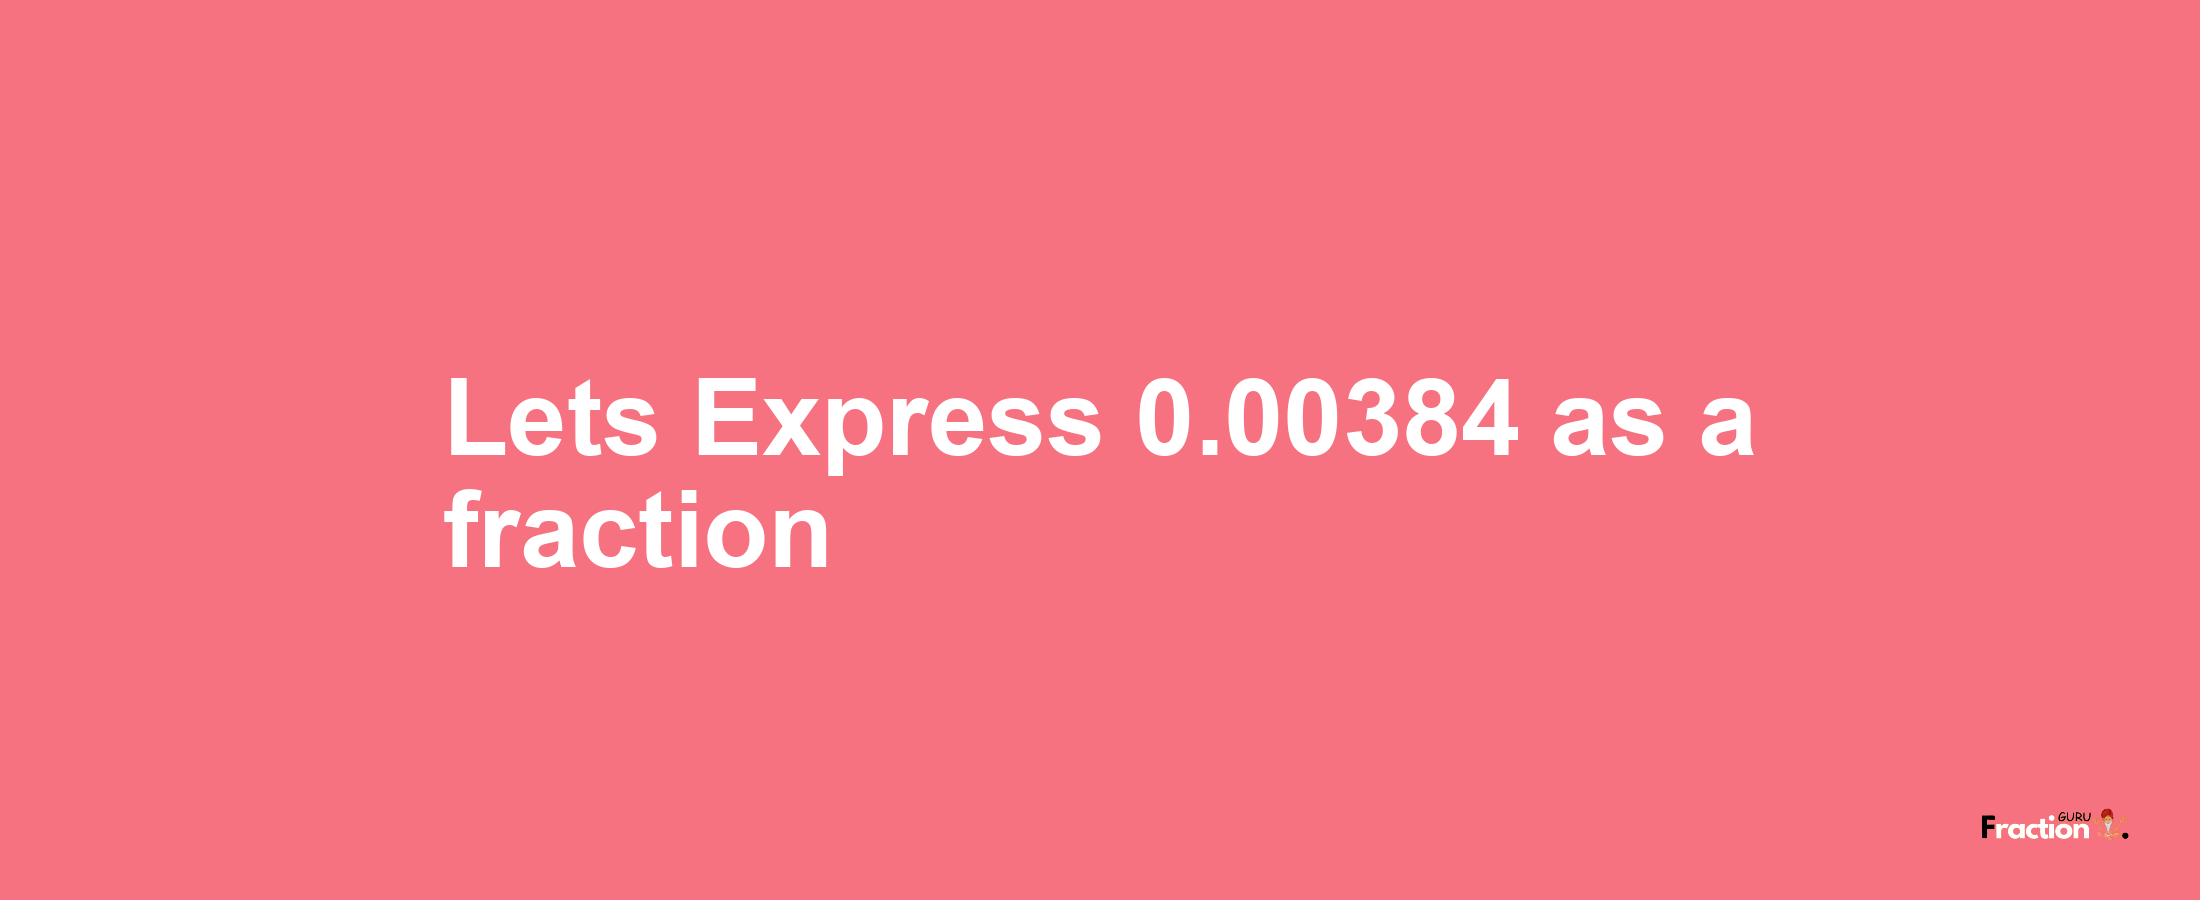 Lets Express 0.00384 as afraction